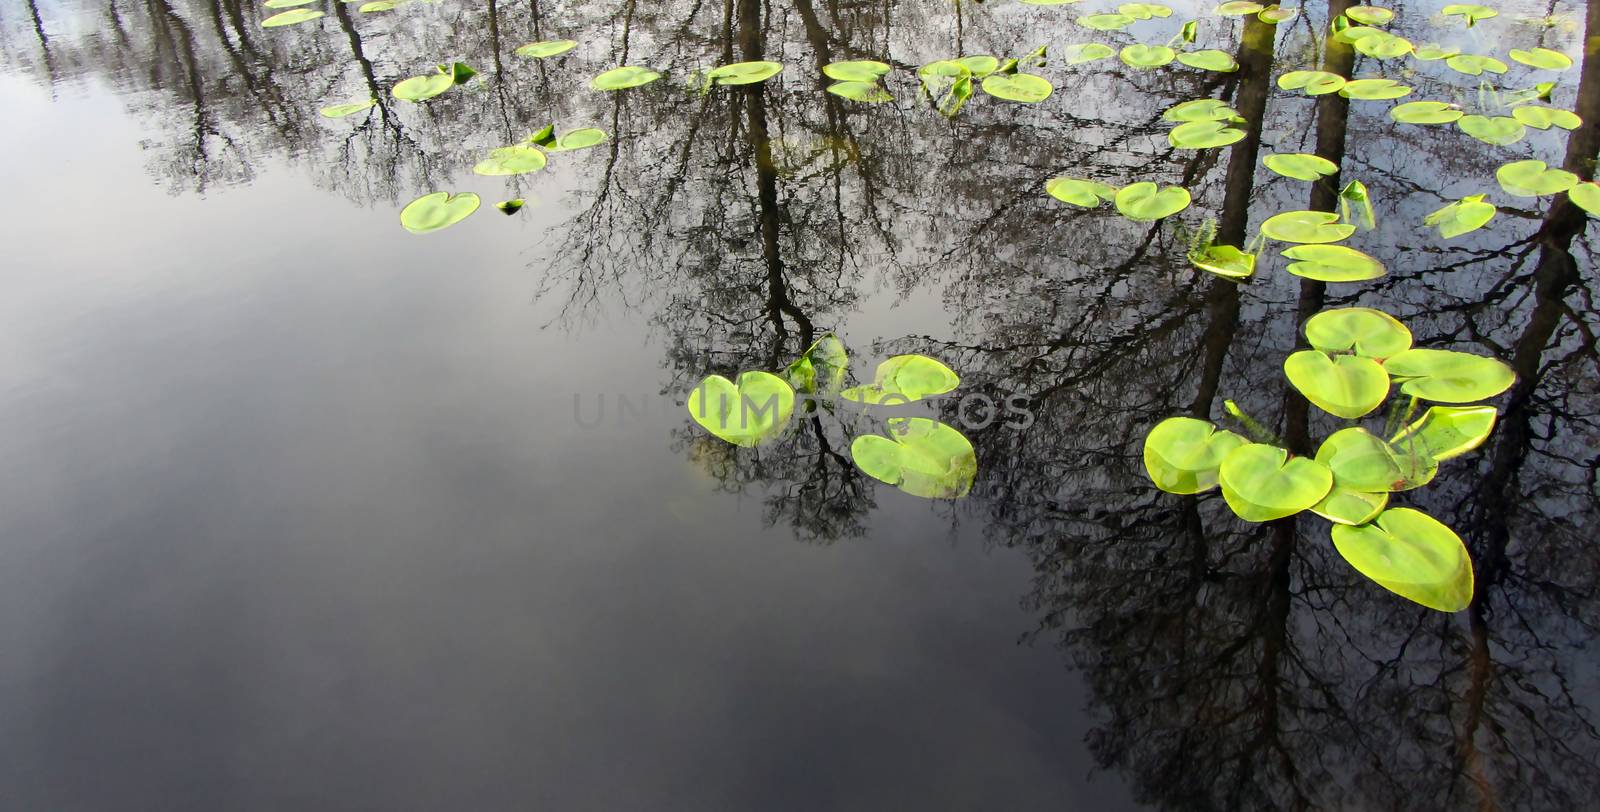 Lily pads on the surface of the pond, the trees are reflected in the water